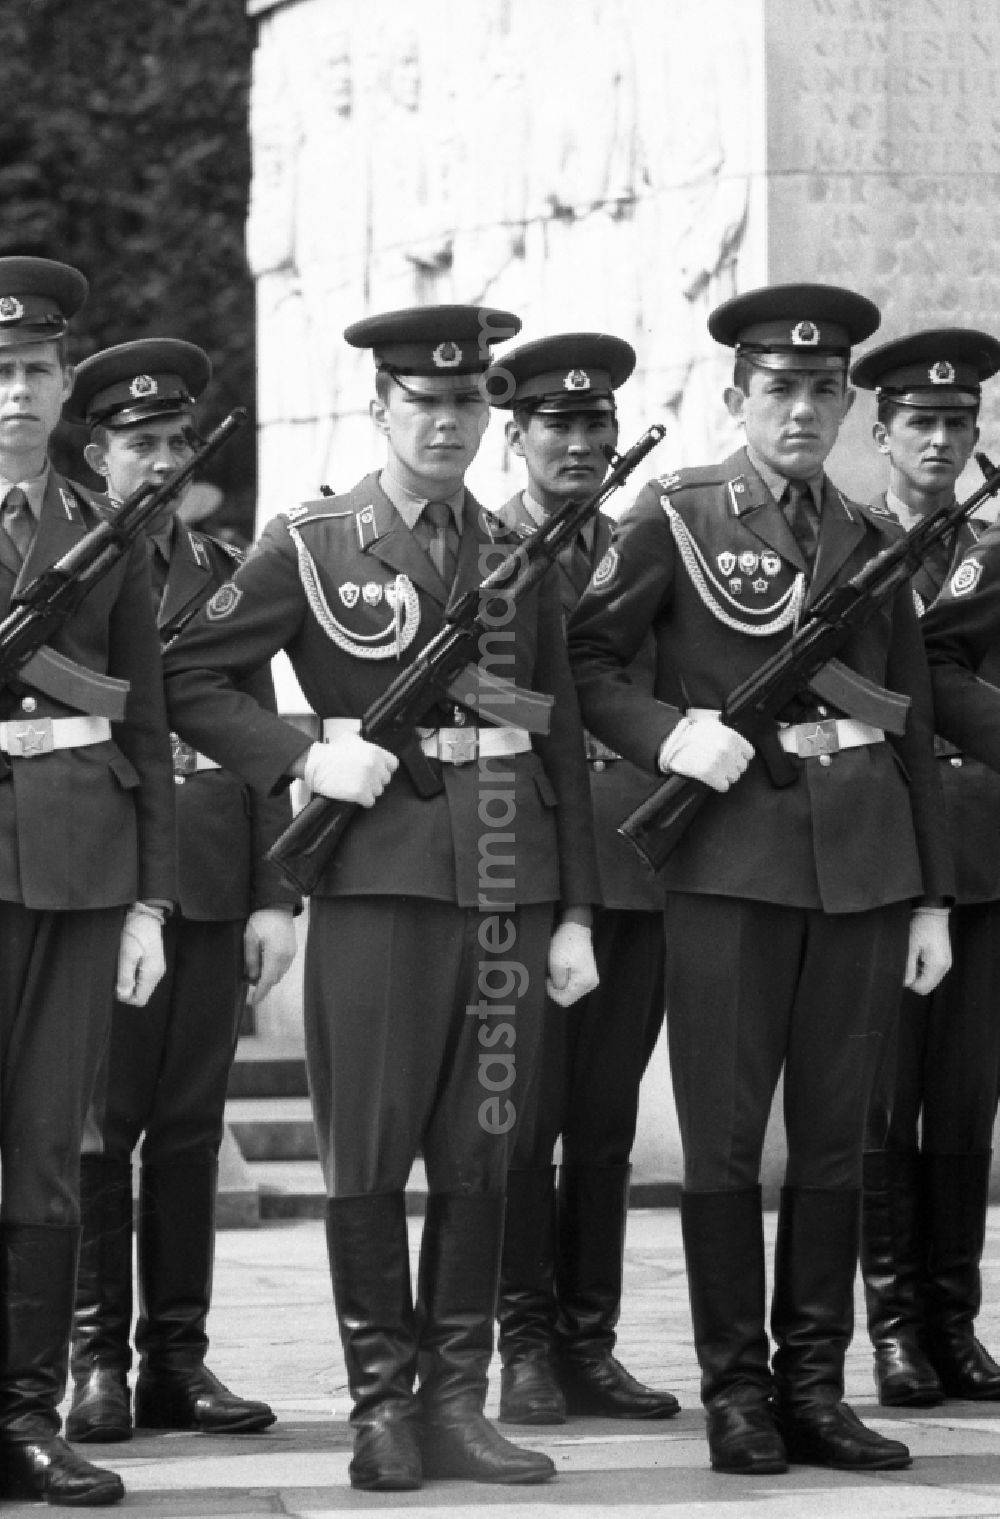 Berlin: Parade formation and march of Russian - Soviet soldiers and officers of the GSSD group on the occasion of a wreath-laying ceremony at the memorial for the fallen Soviet soldiers in the district of Treptow in Berlin East Berlin on the territory of the former GDR, German Democratic Republic